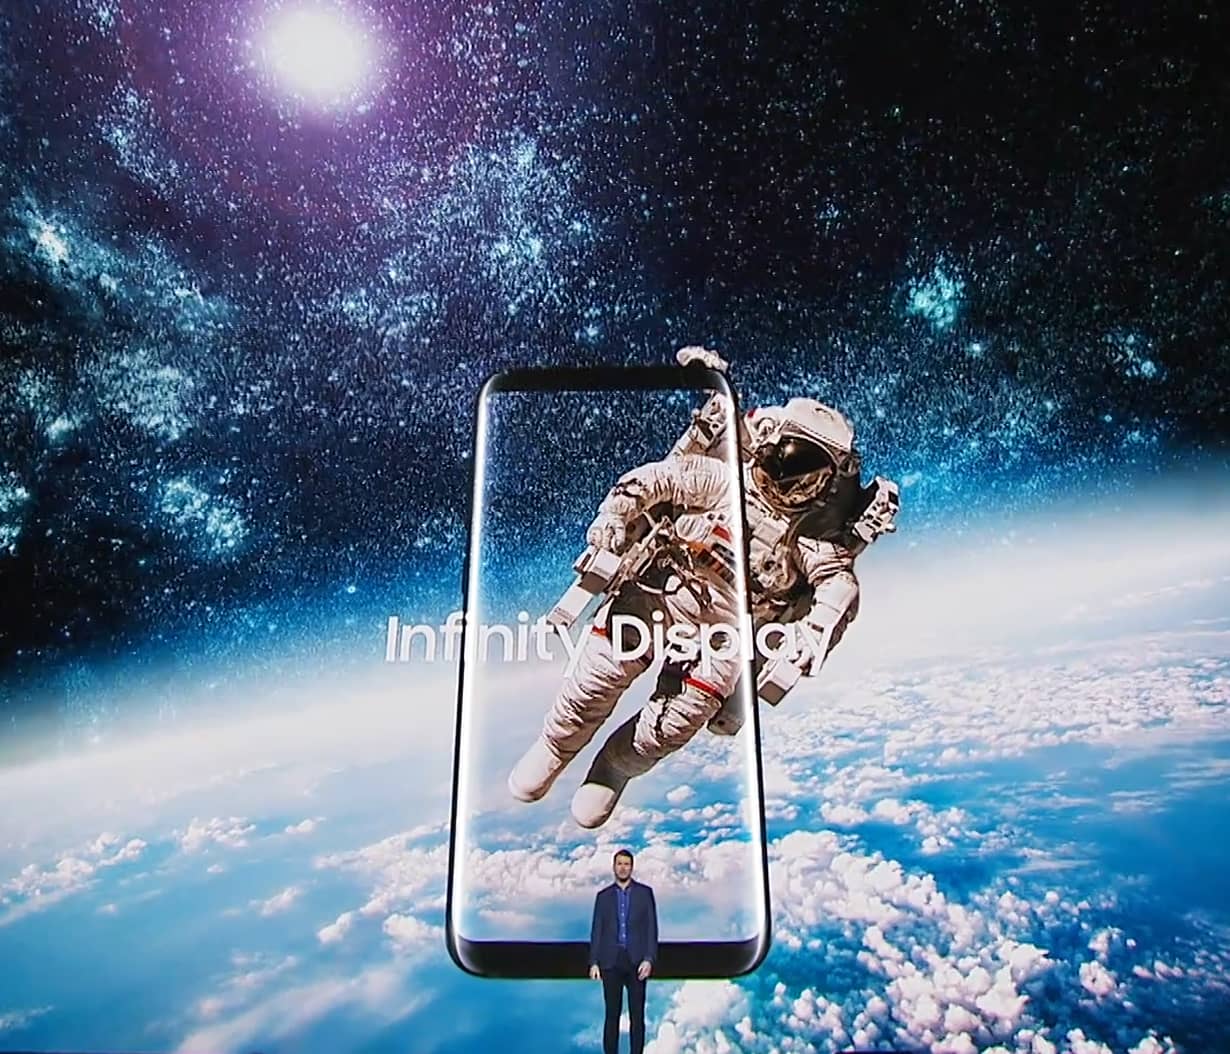 The innovative Infinity Display offers more viewing area without a bigger phone